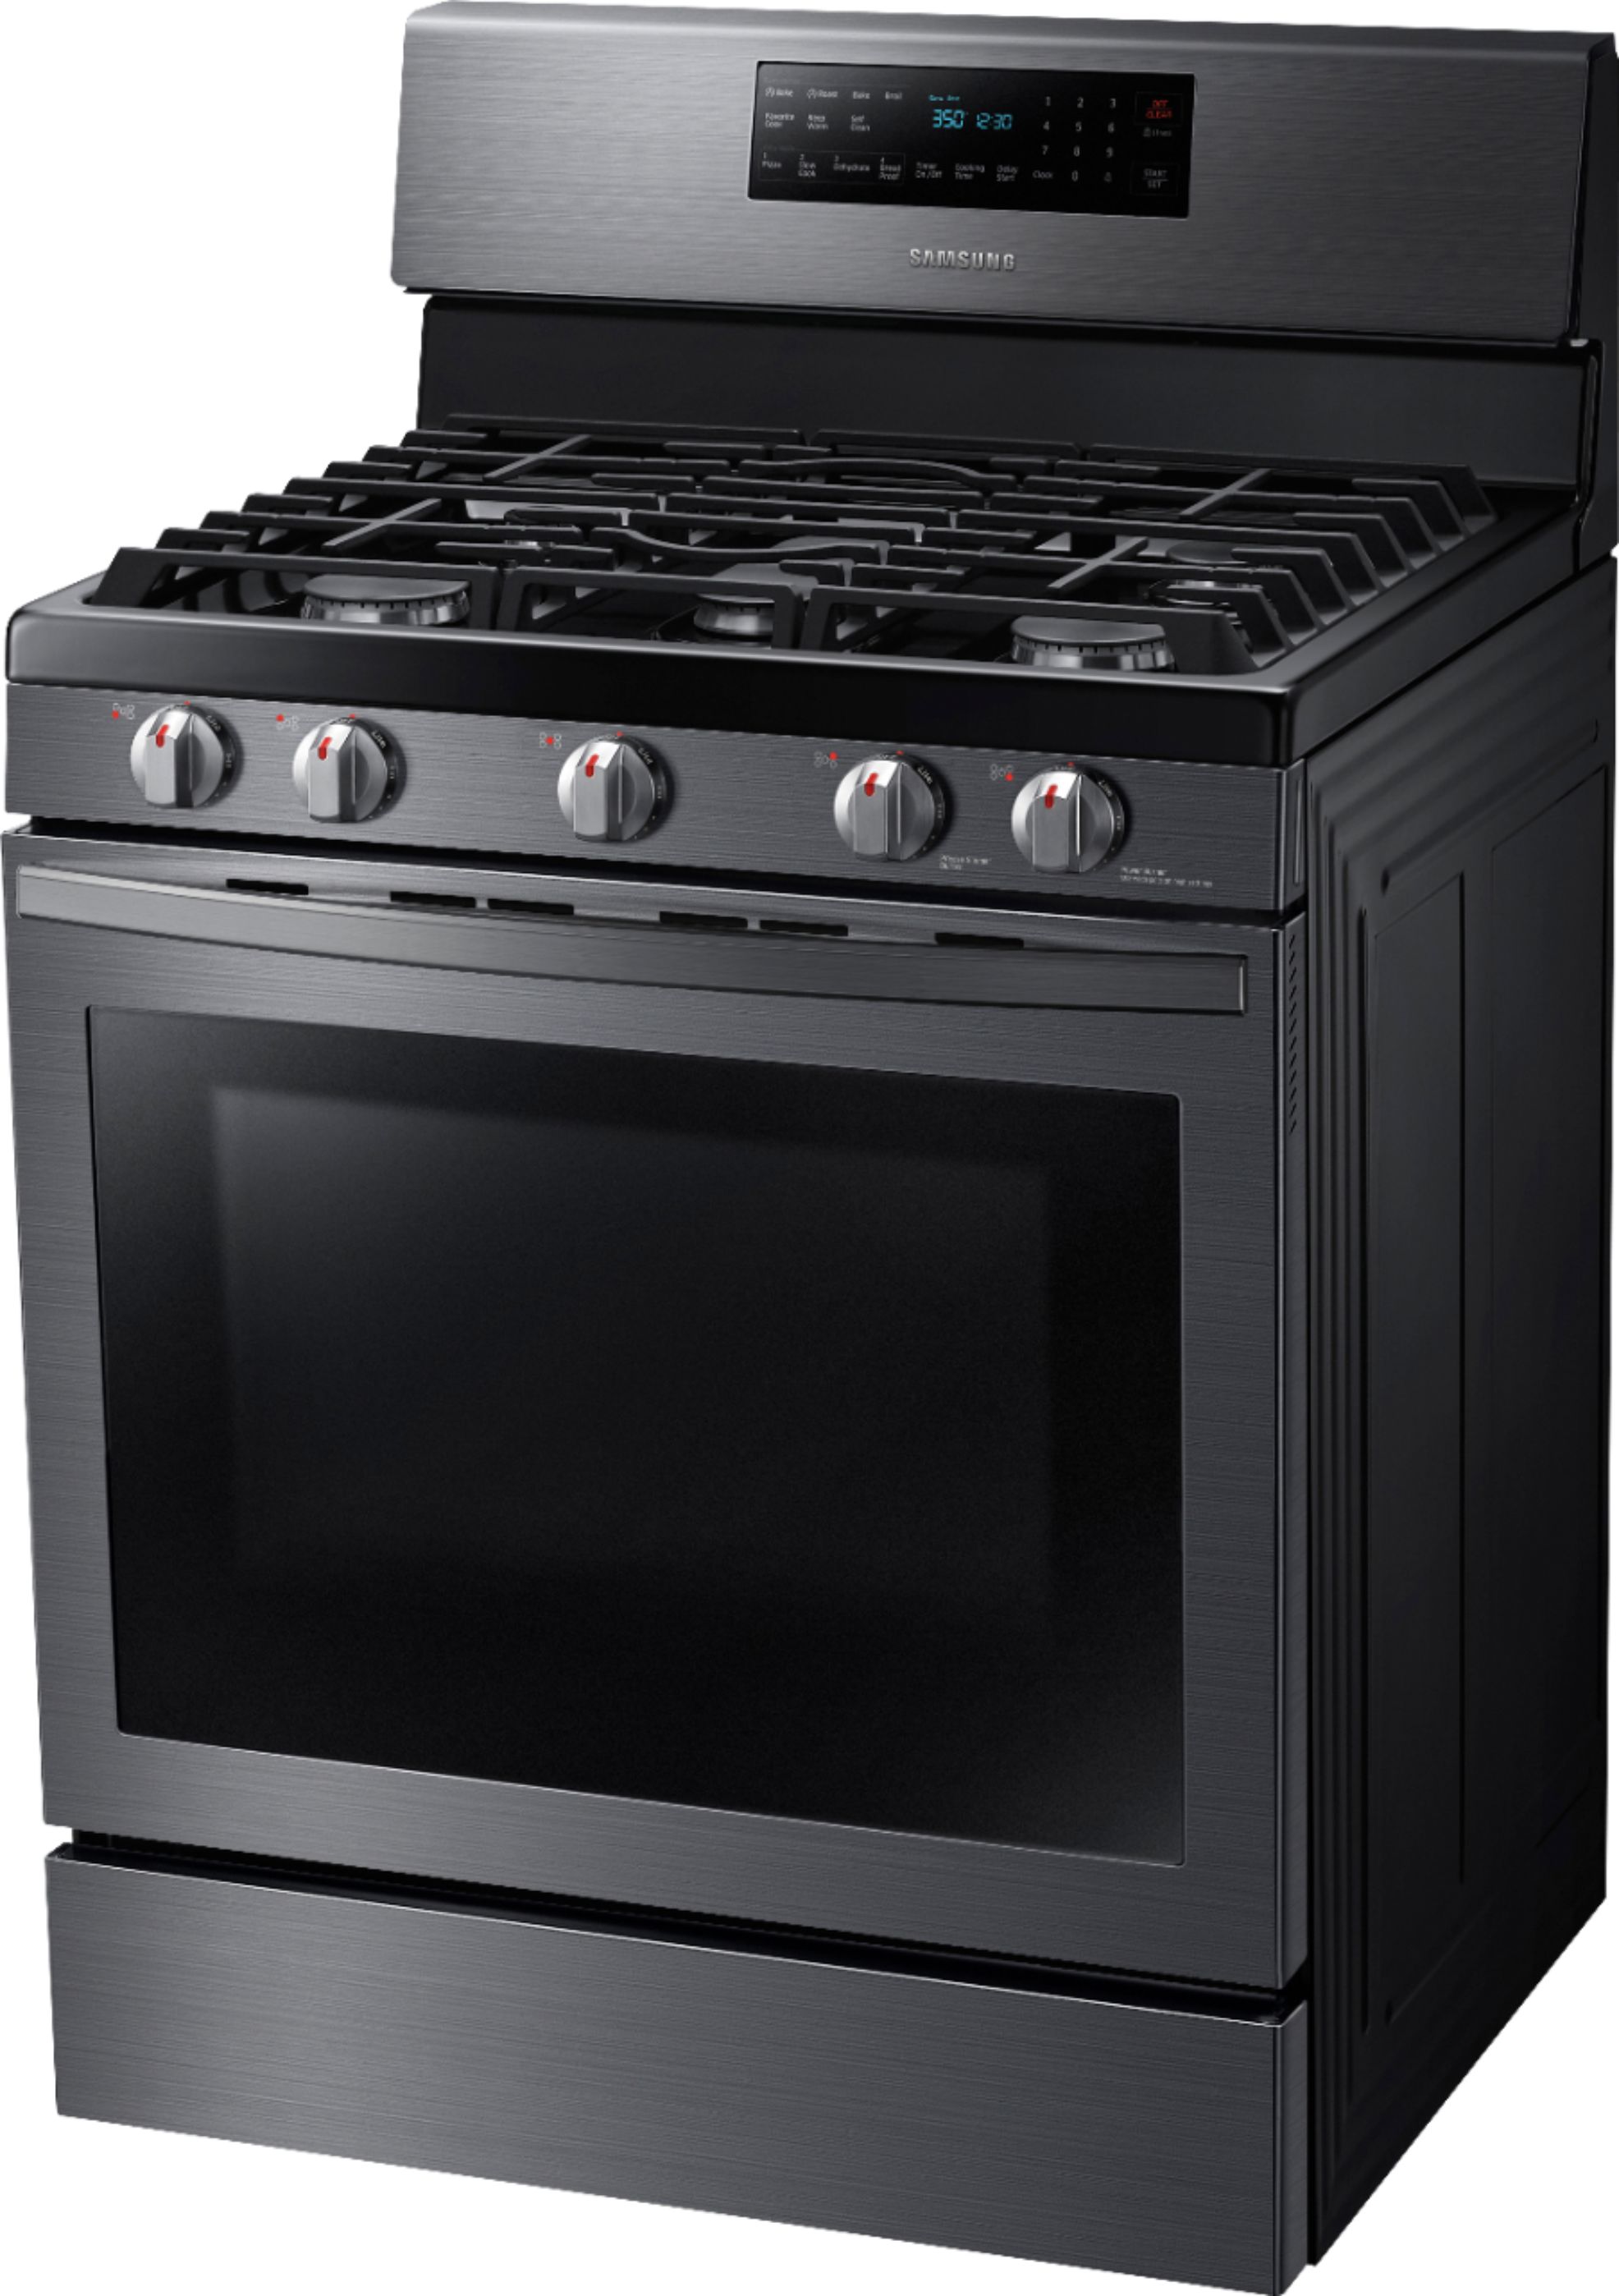 Left View: Samsung - 5.8 Cu. Ft. Freestanding Gas Convection Range with Self-High Heat Cleaning - Black Stainless Steel